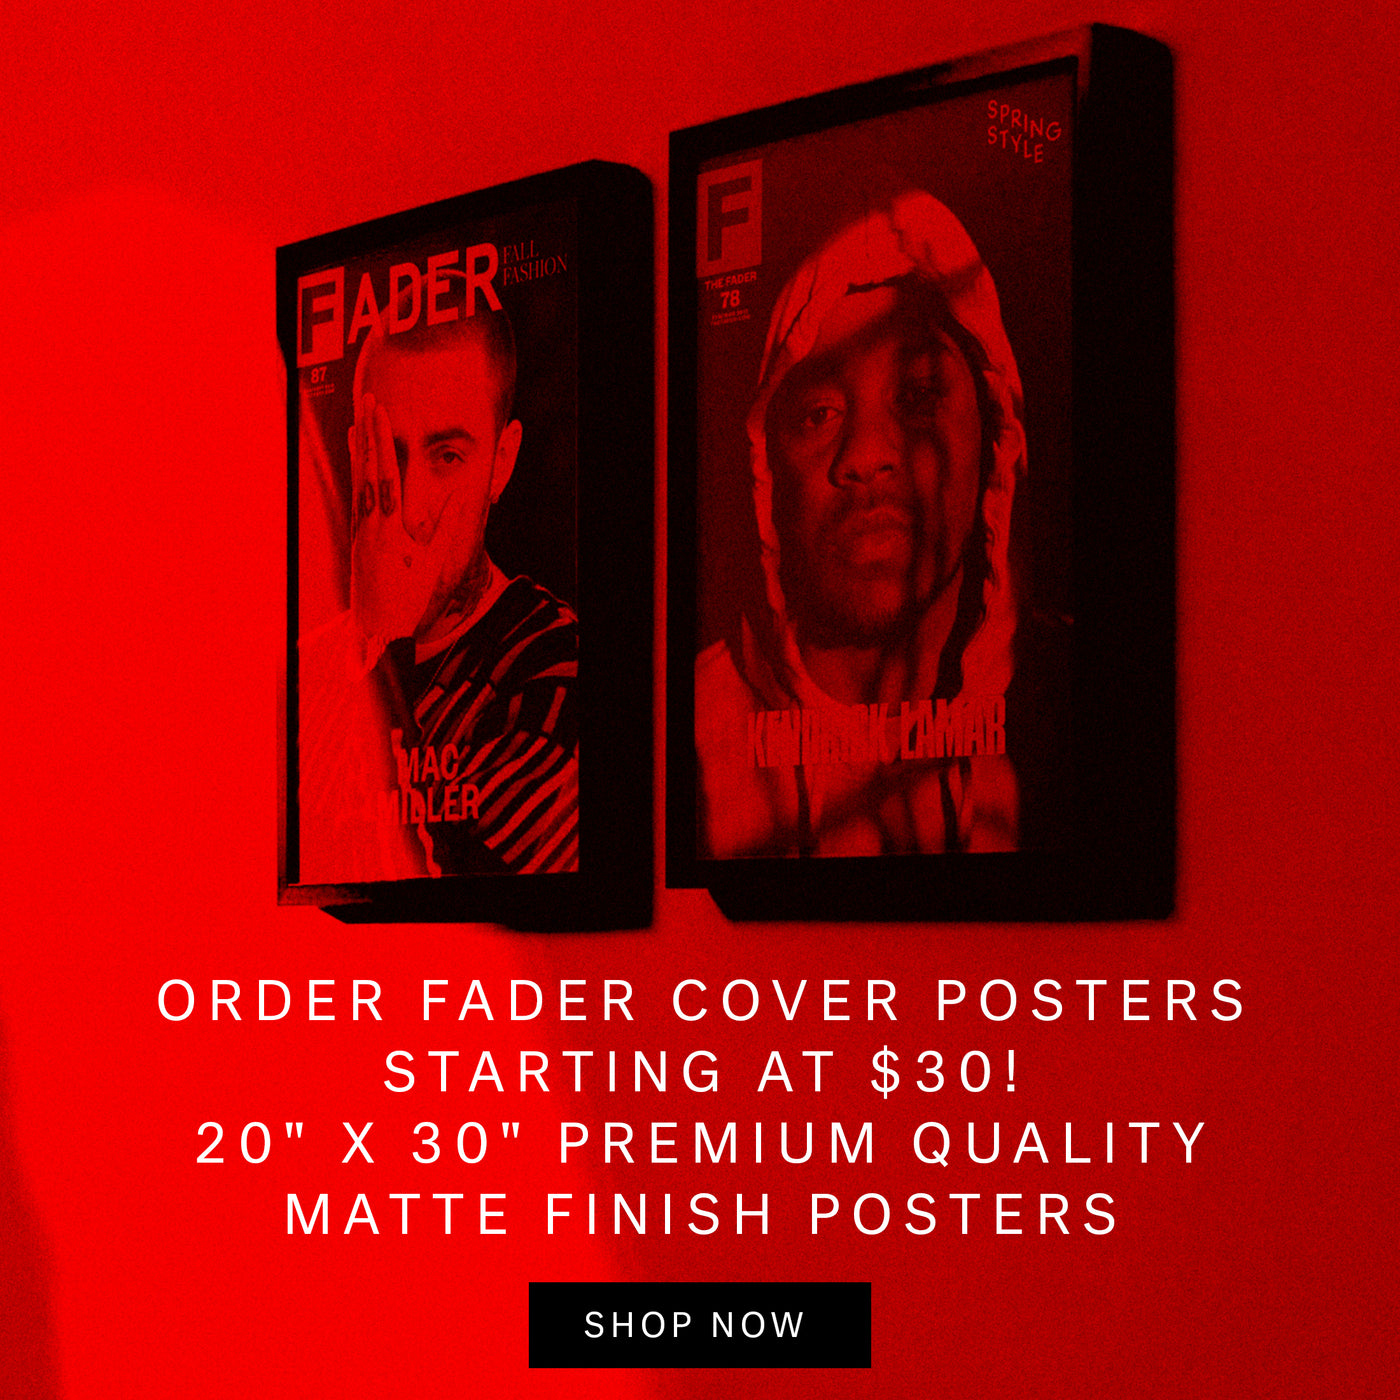 Mac Miller poster-The FADER issue 87 cover. Kendrick Lamar poster- the FADER issue 78 cover.